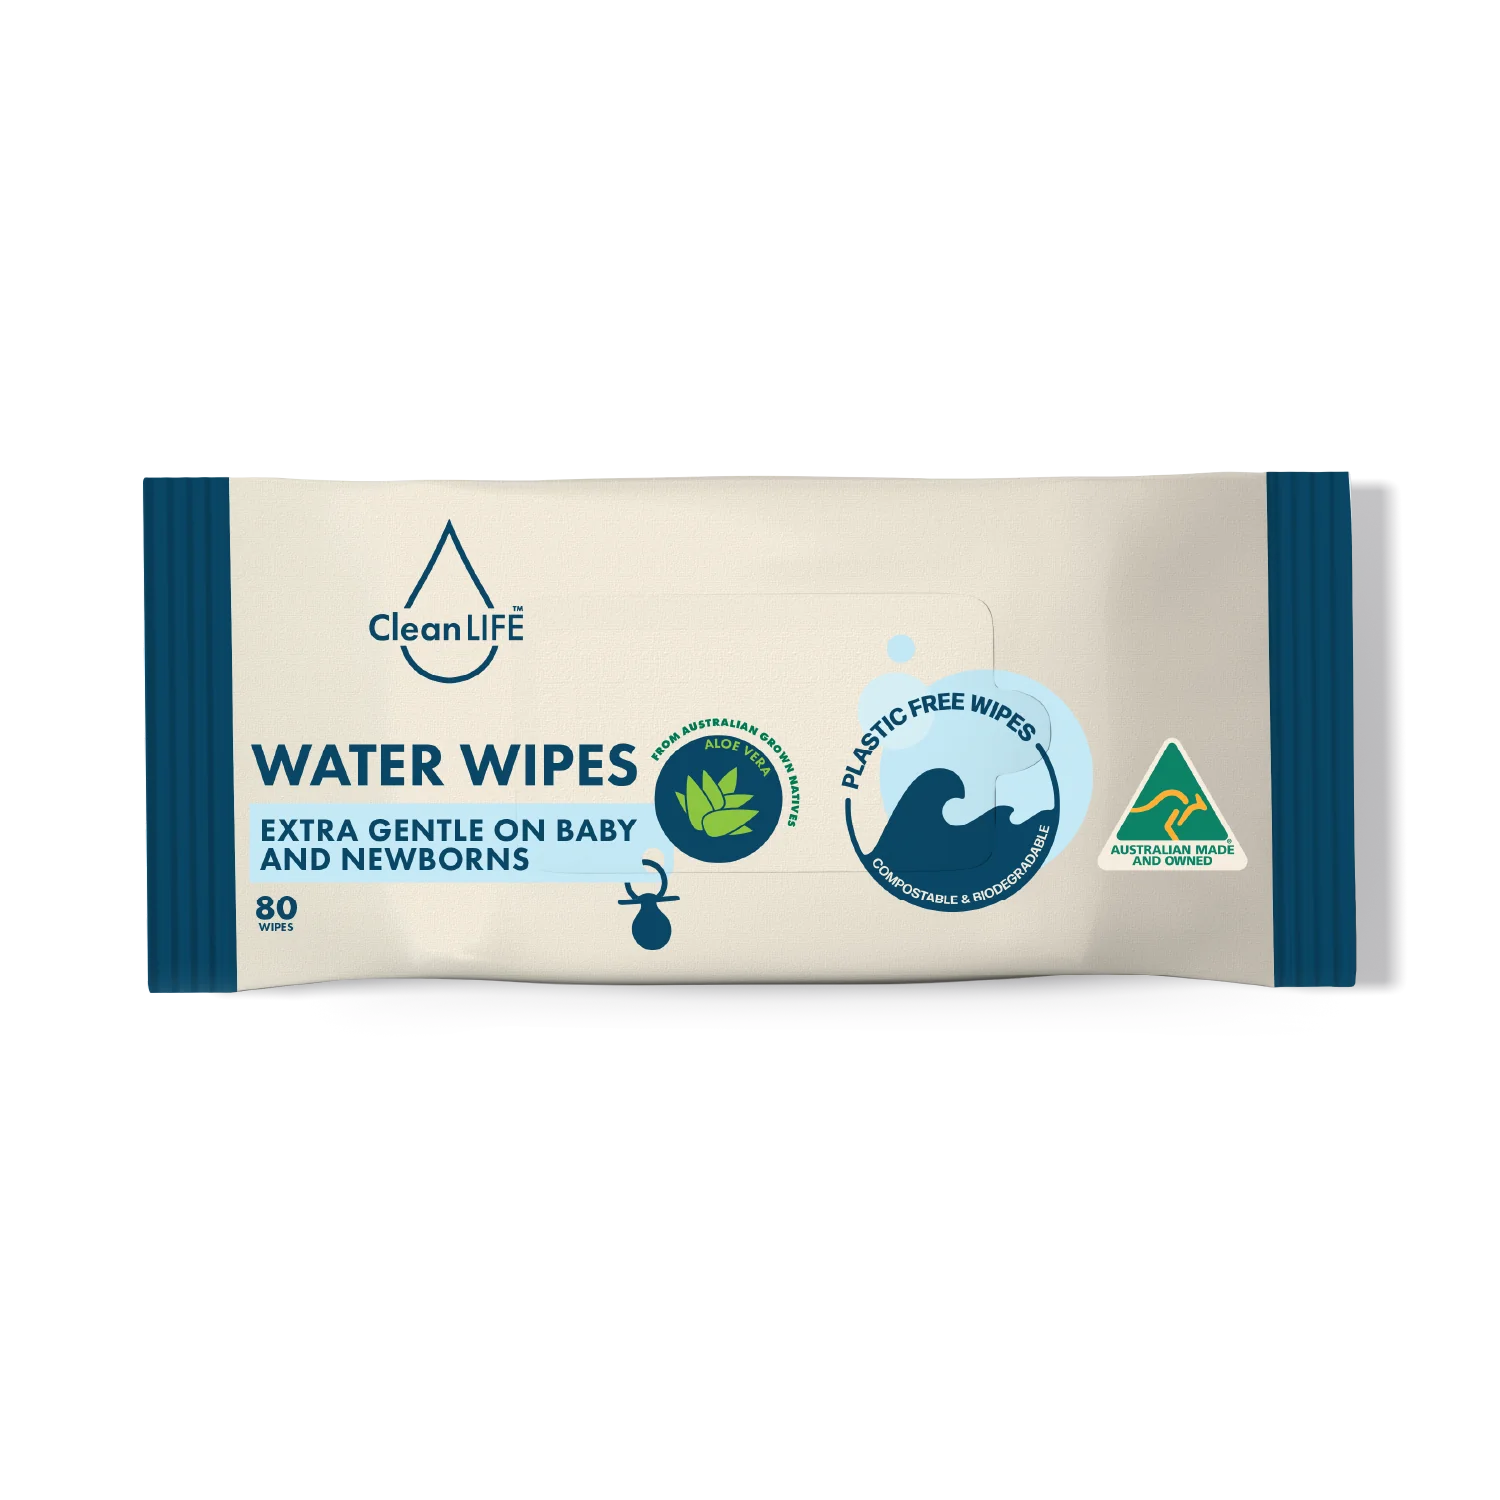 Water wipes - CleanLIFE